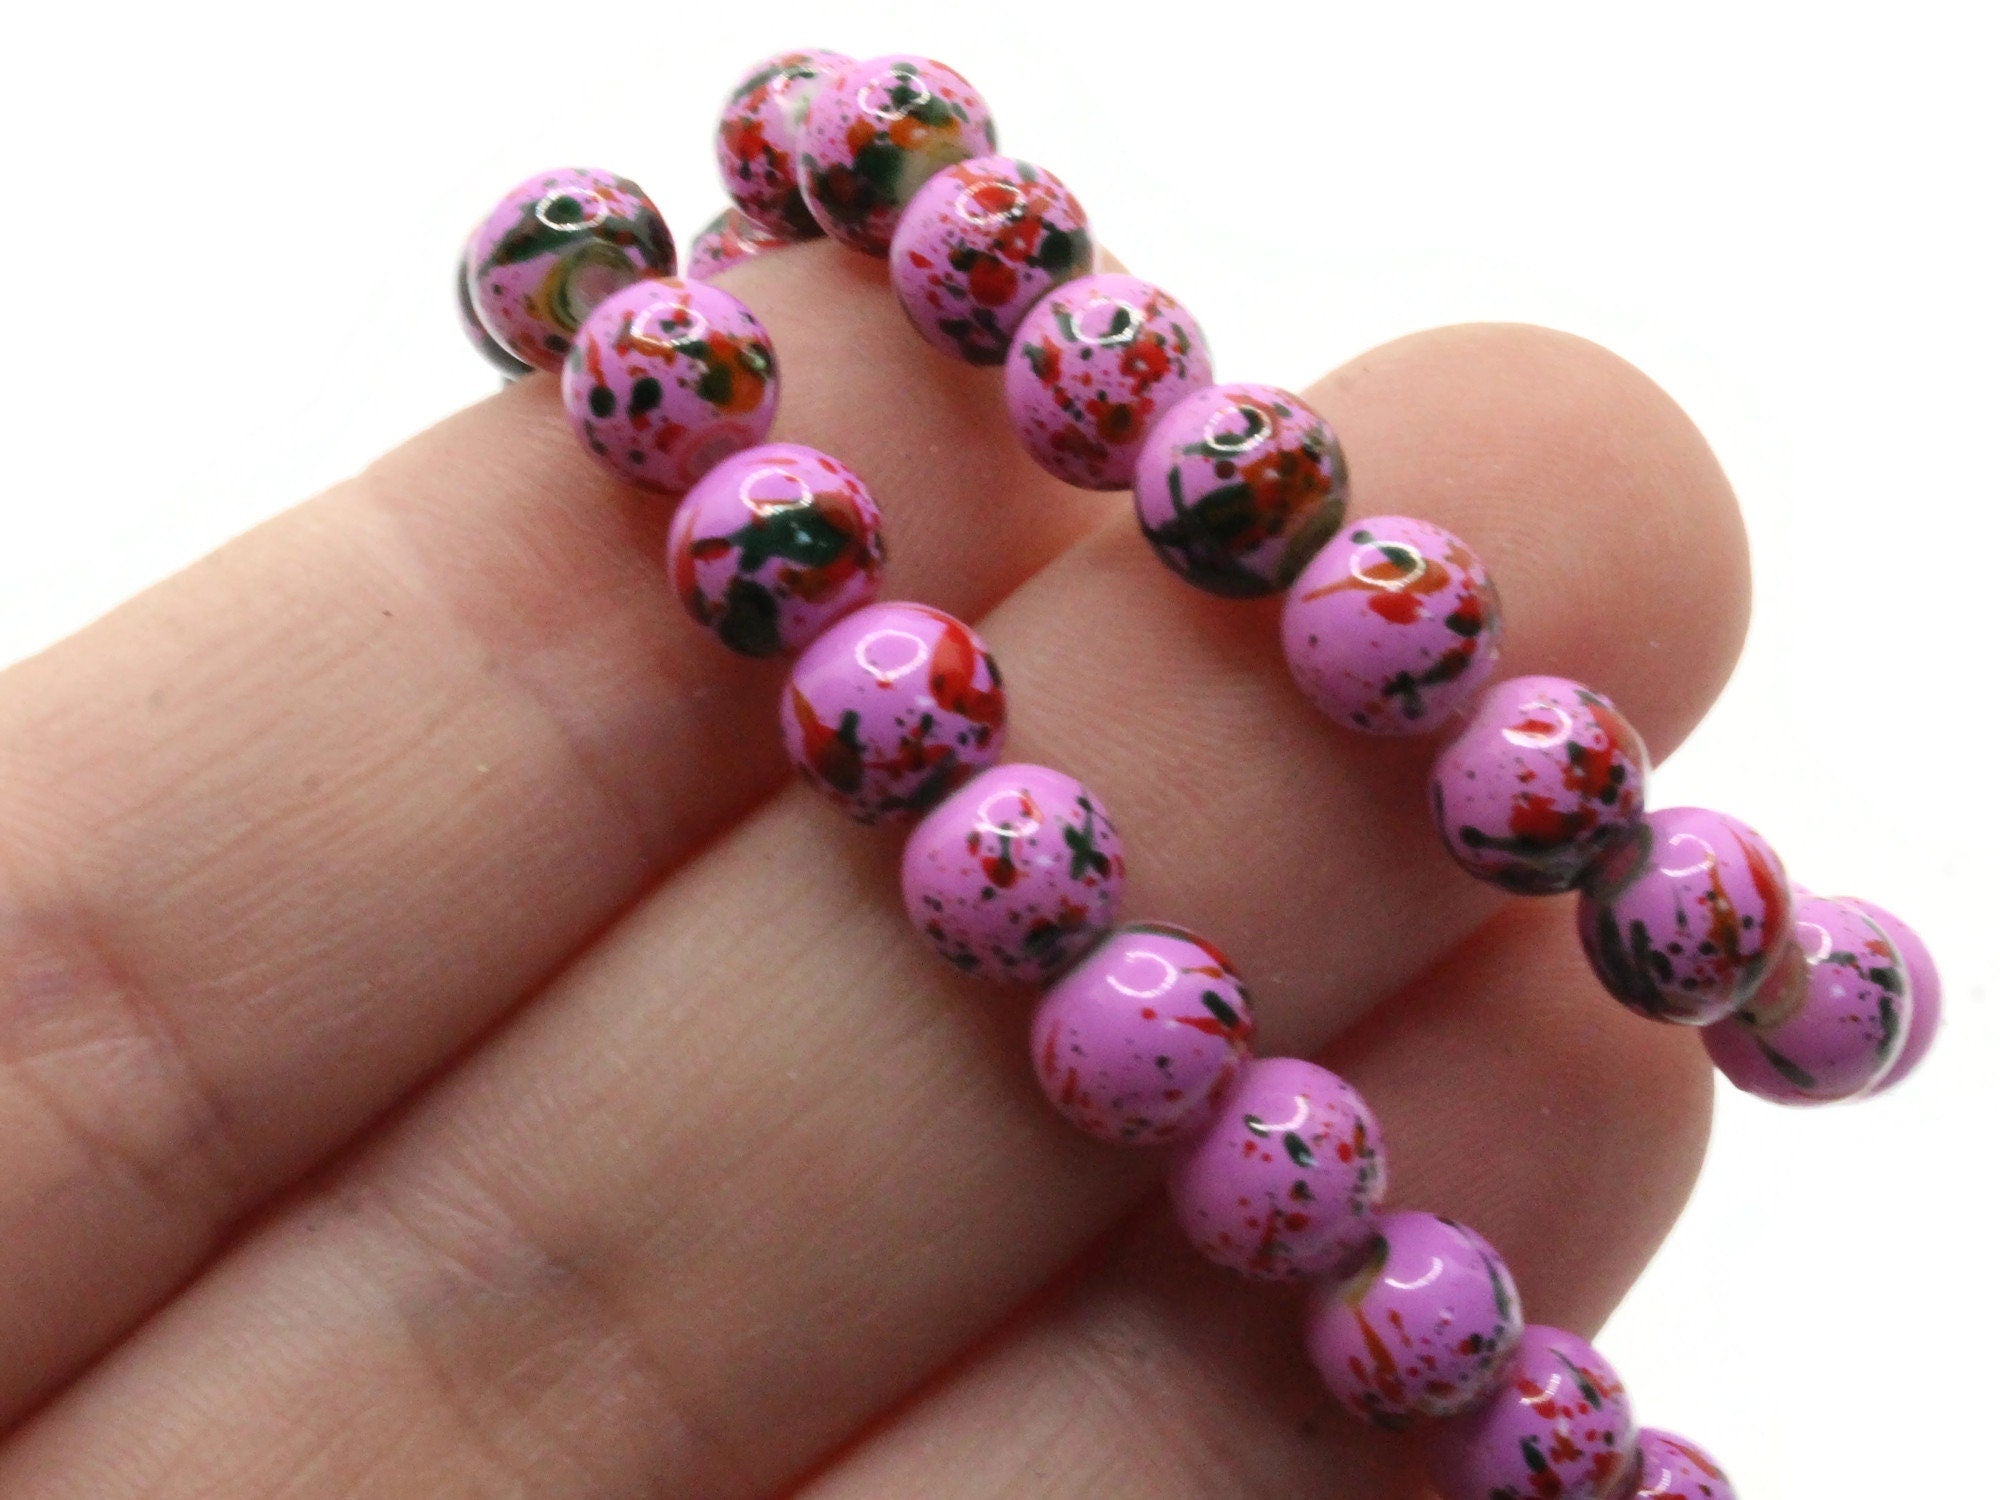 40 10mm White with Purple Round Glass Splatter Paint Beads by Smileyboy Beads | Michaels